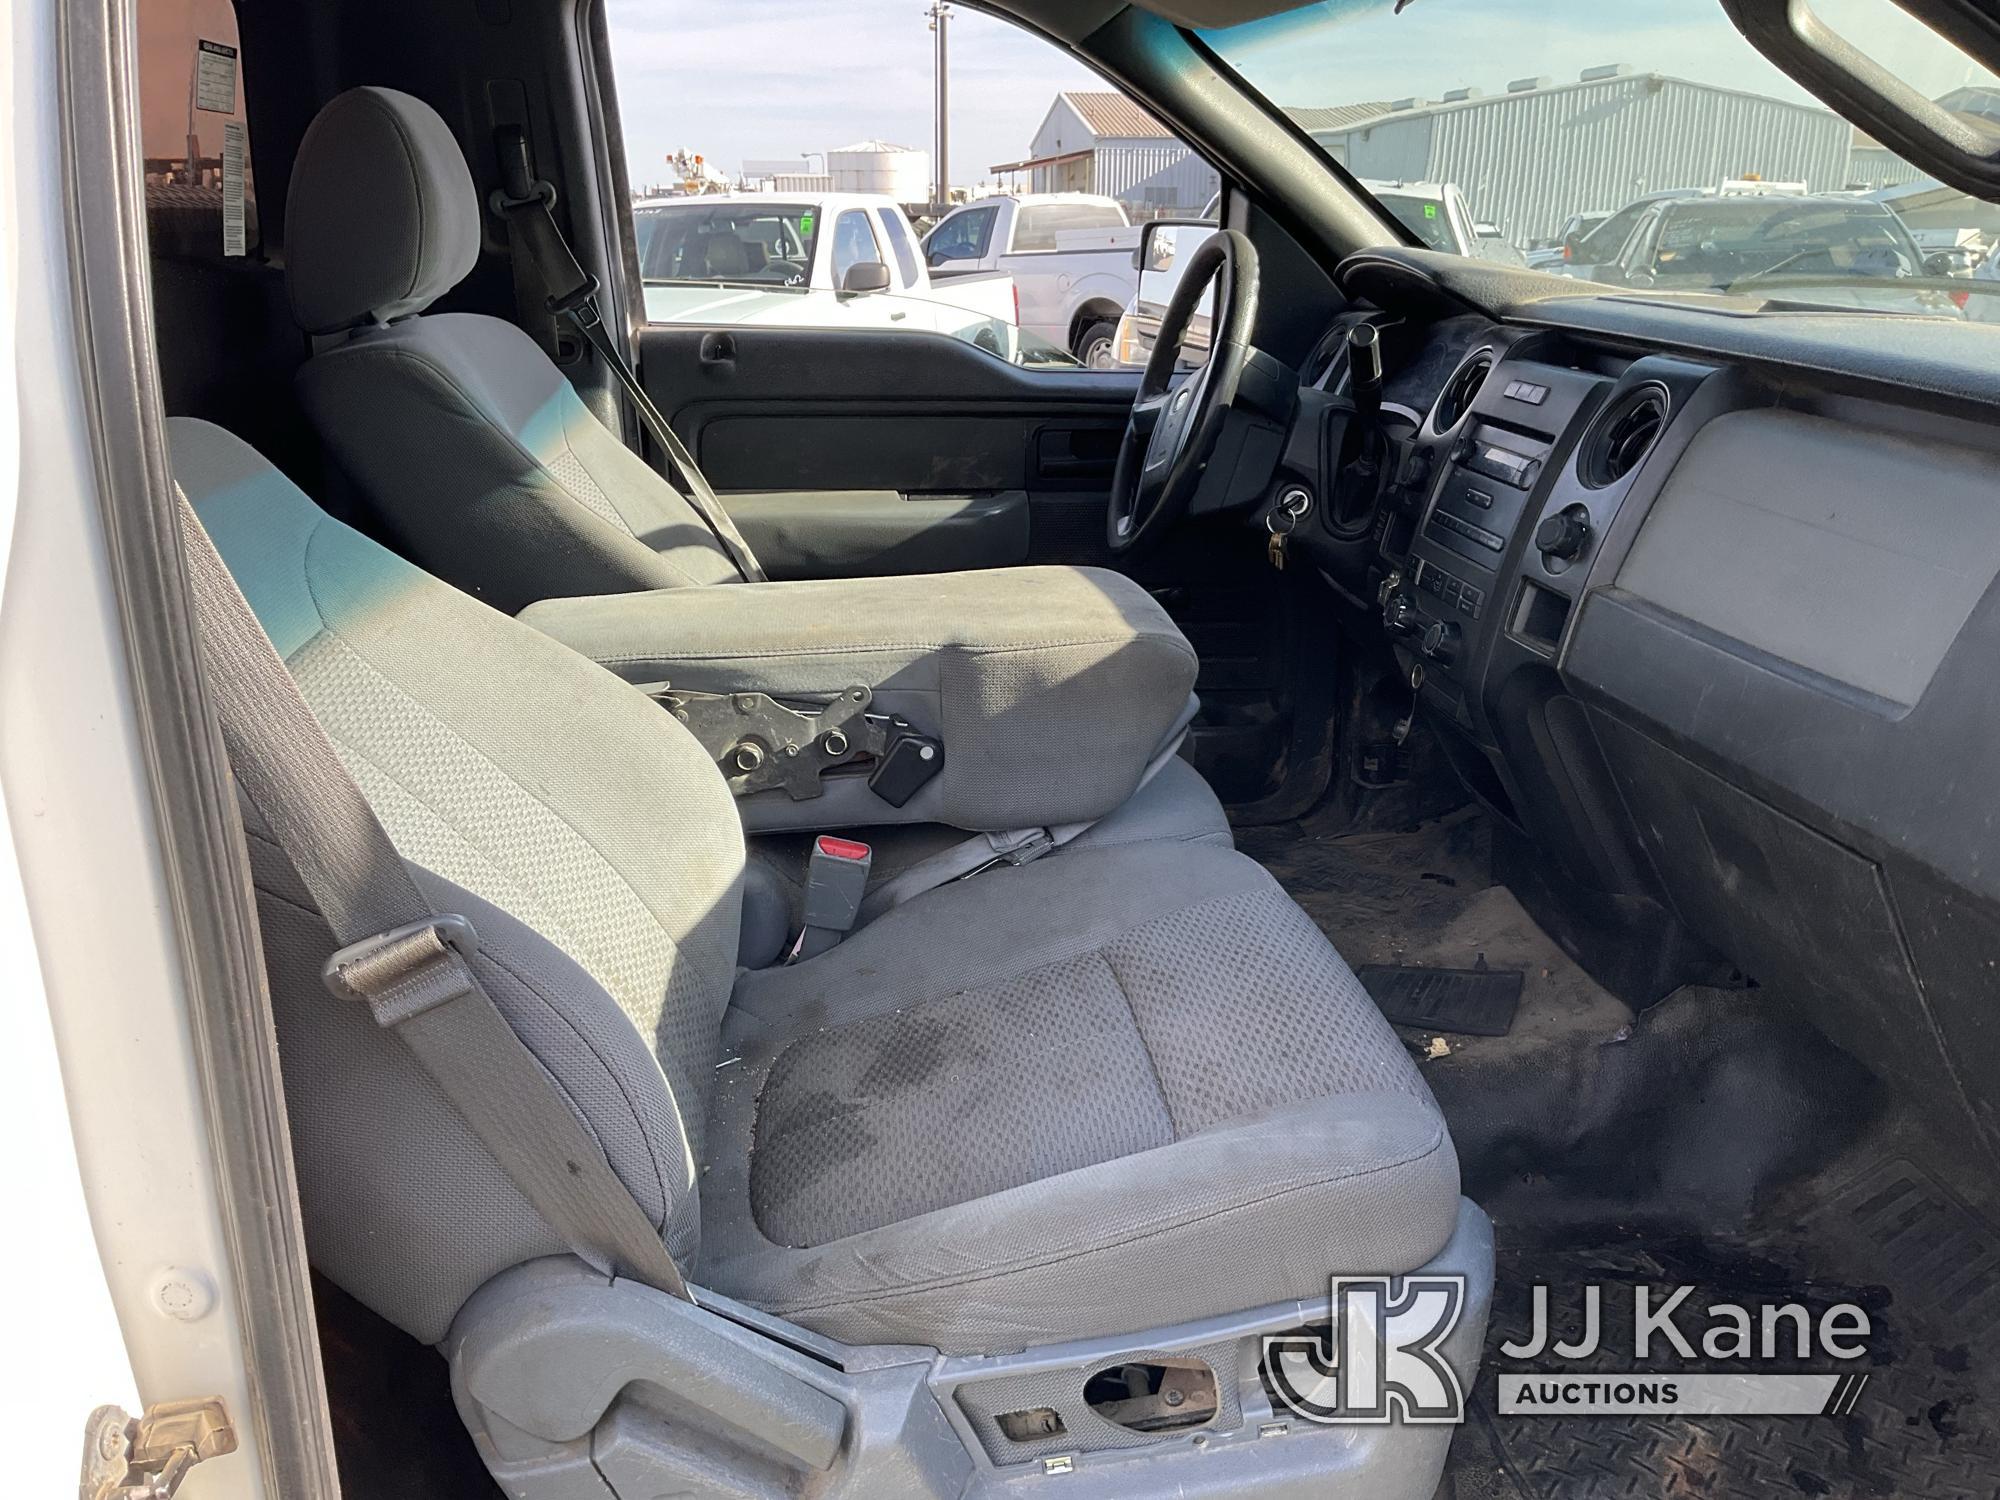 (Dixon, CA) 2013 Ford F150 4x4 Pickup Truck Runs & Moves, Engine Monitors, Stereo Not Working